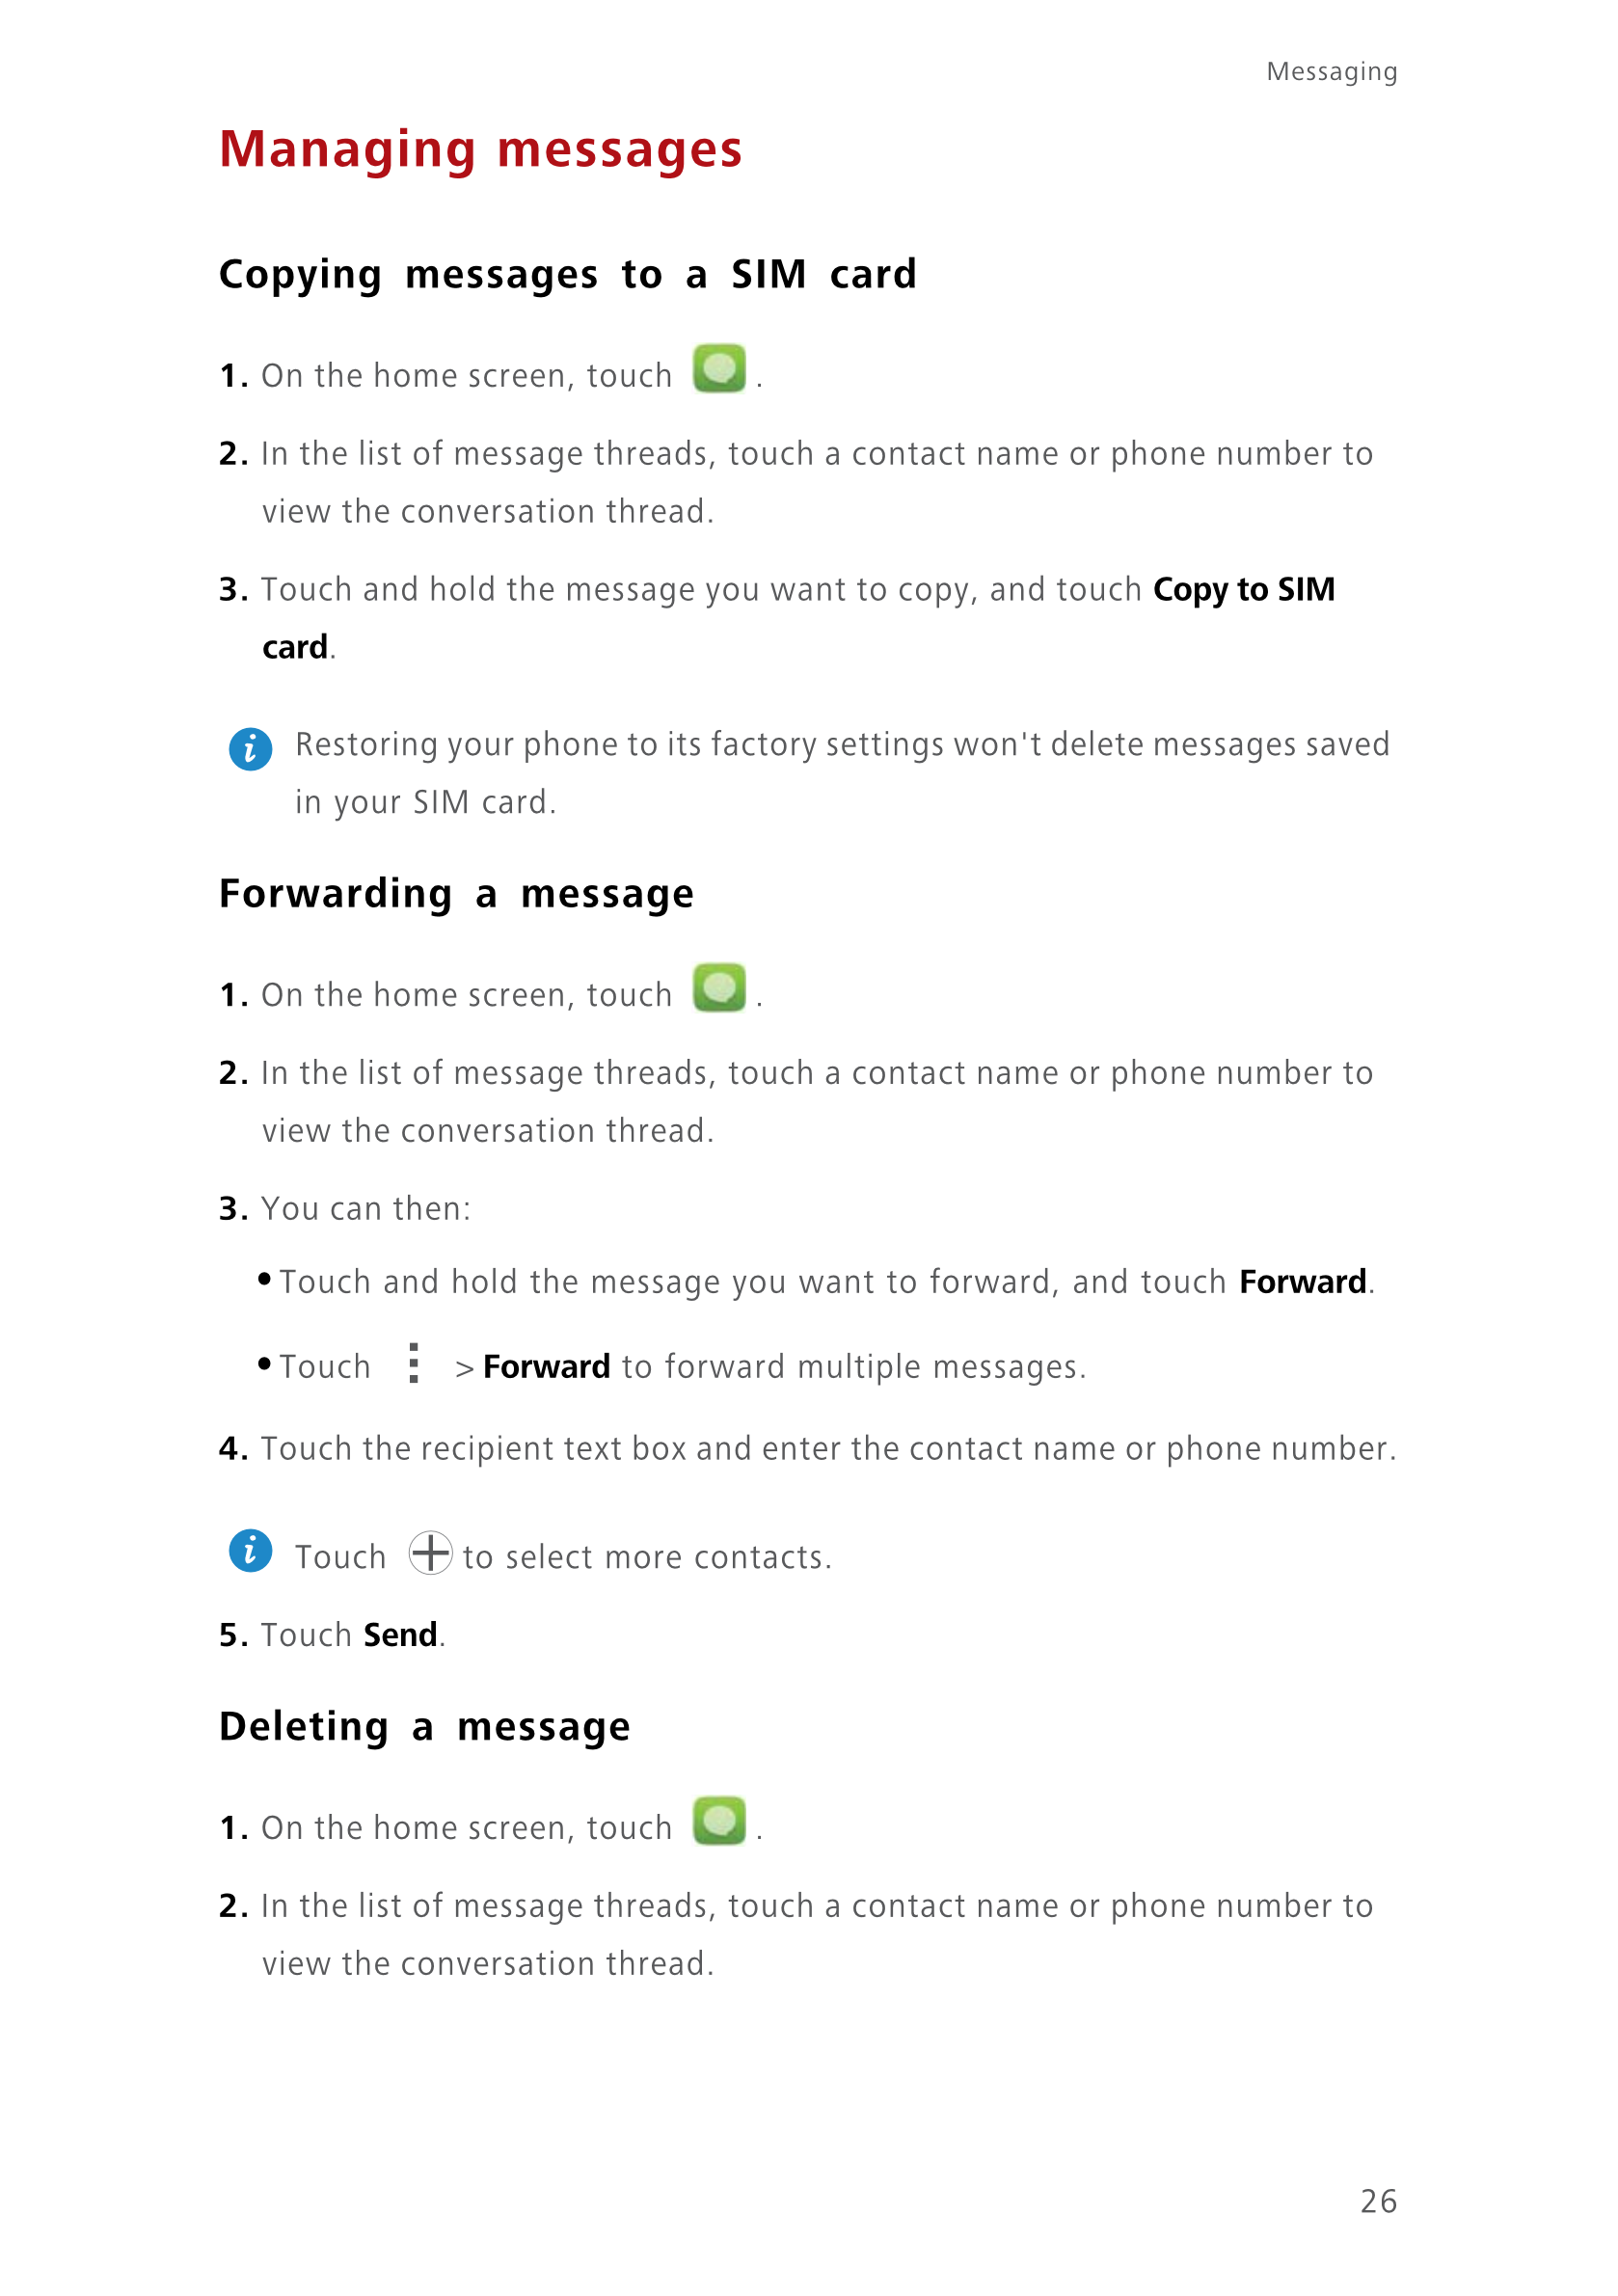 Messaging
Managing messages
Copying messages to a SIM card
1.  On the home screen, touch  .
2.  In the list of message threads, 